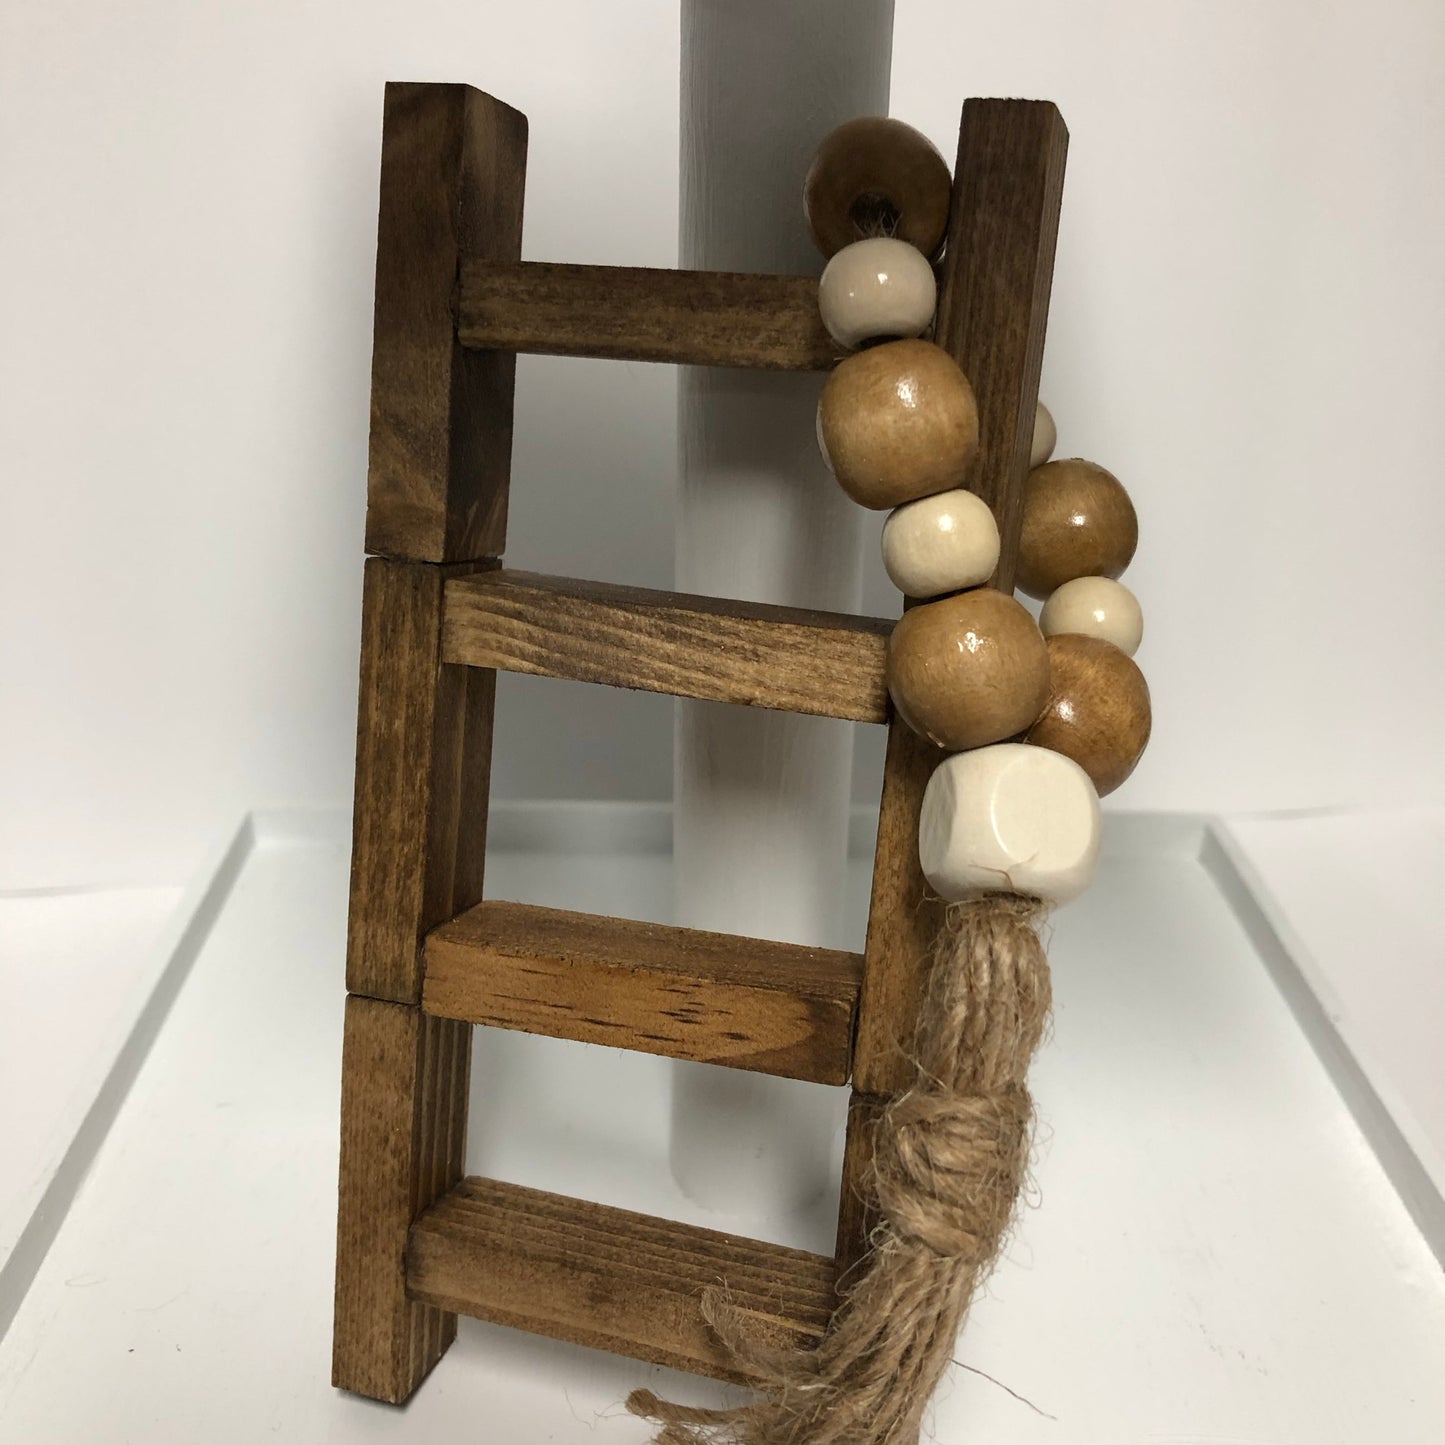 Mini Ladder with Beads